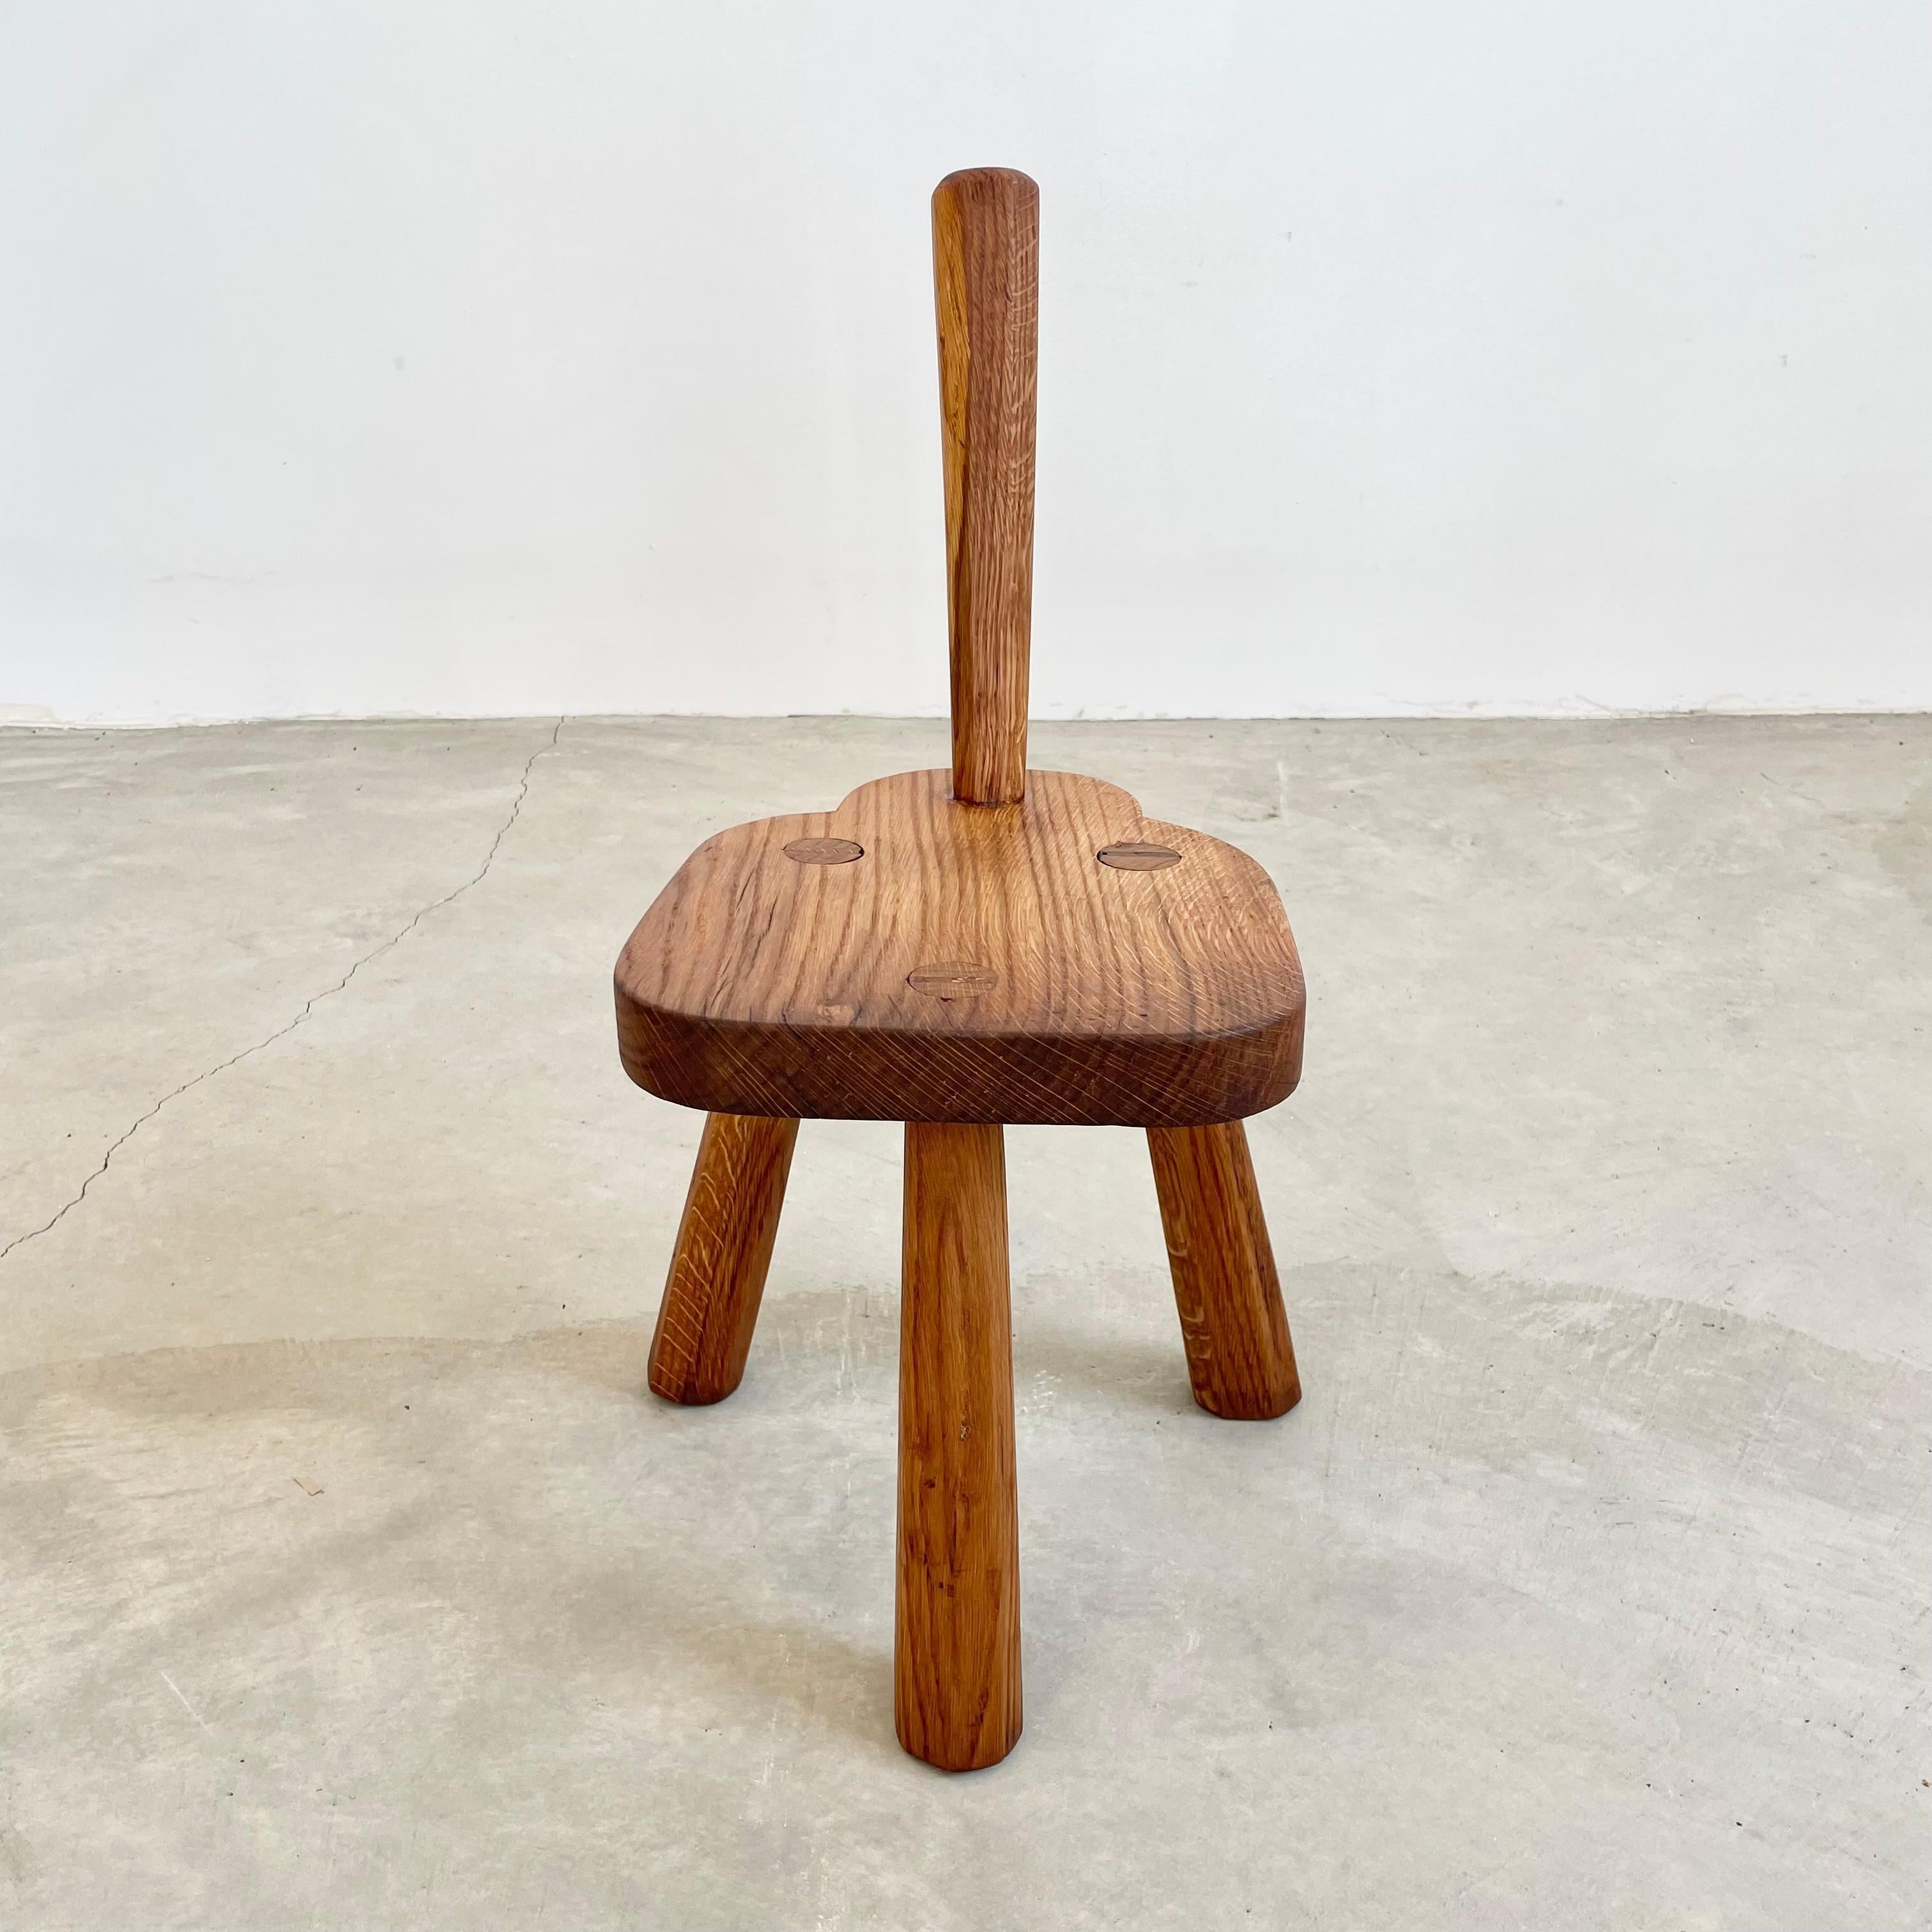 Mid-20th Century Wood Tripod Stool with Backrest, 1960s France For Sale